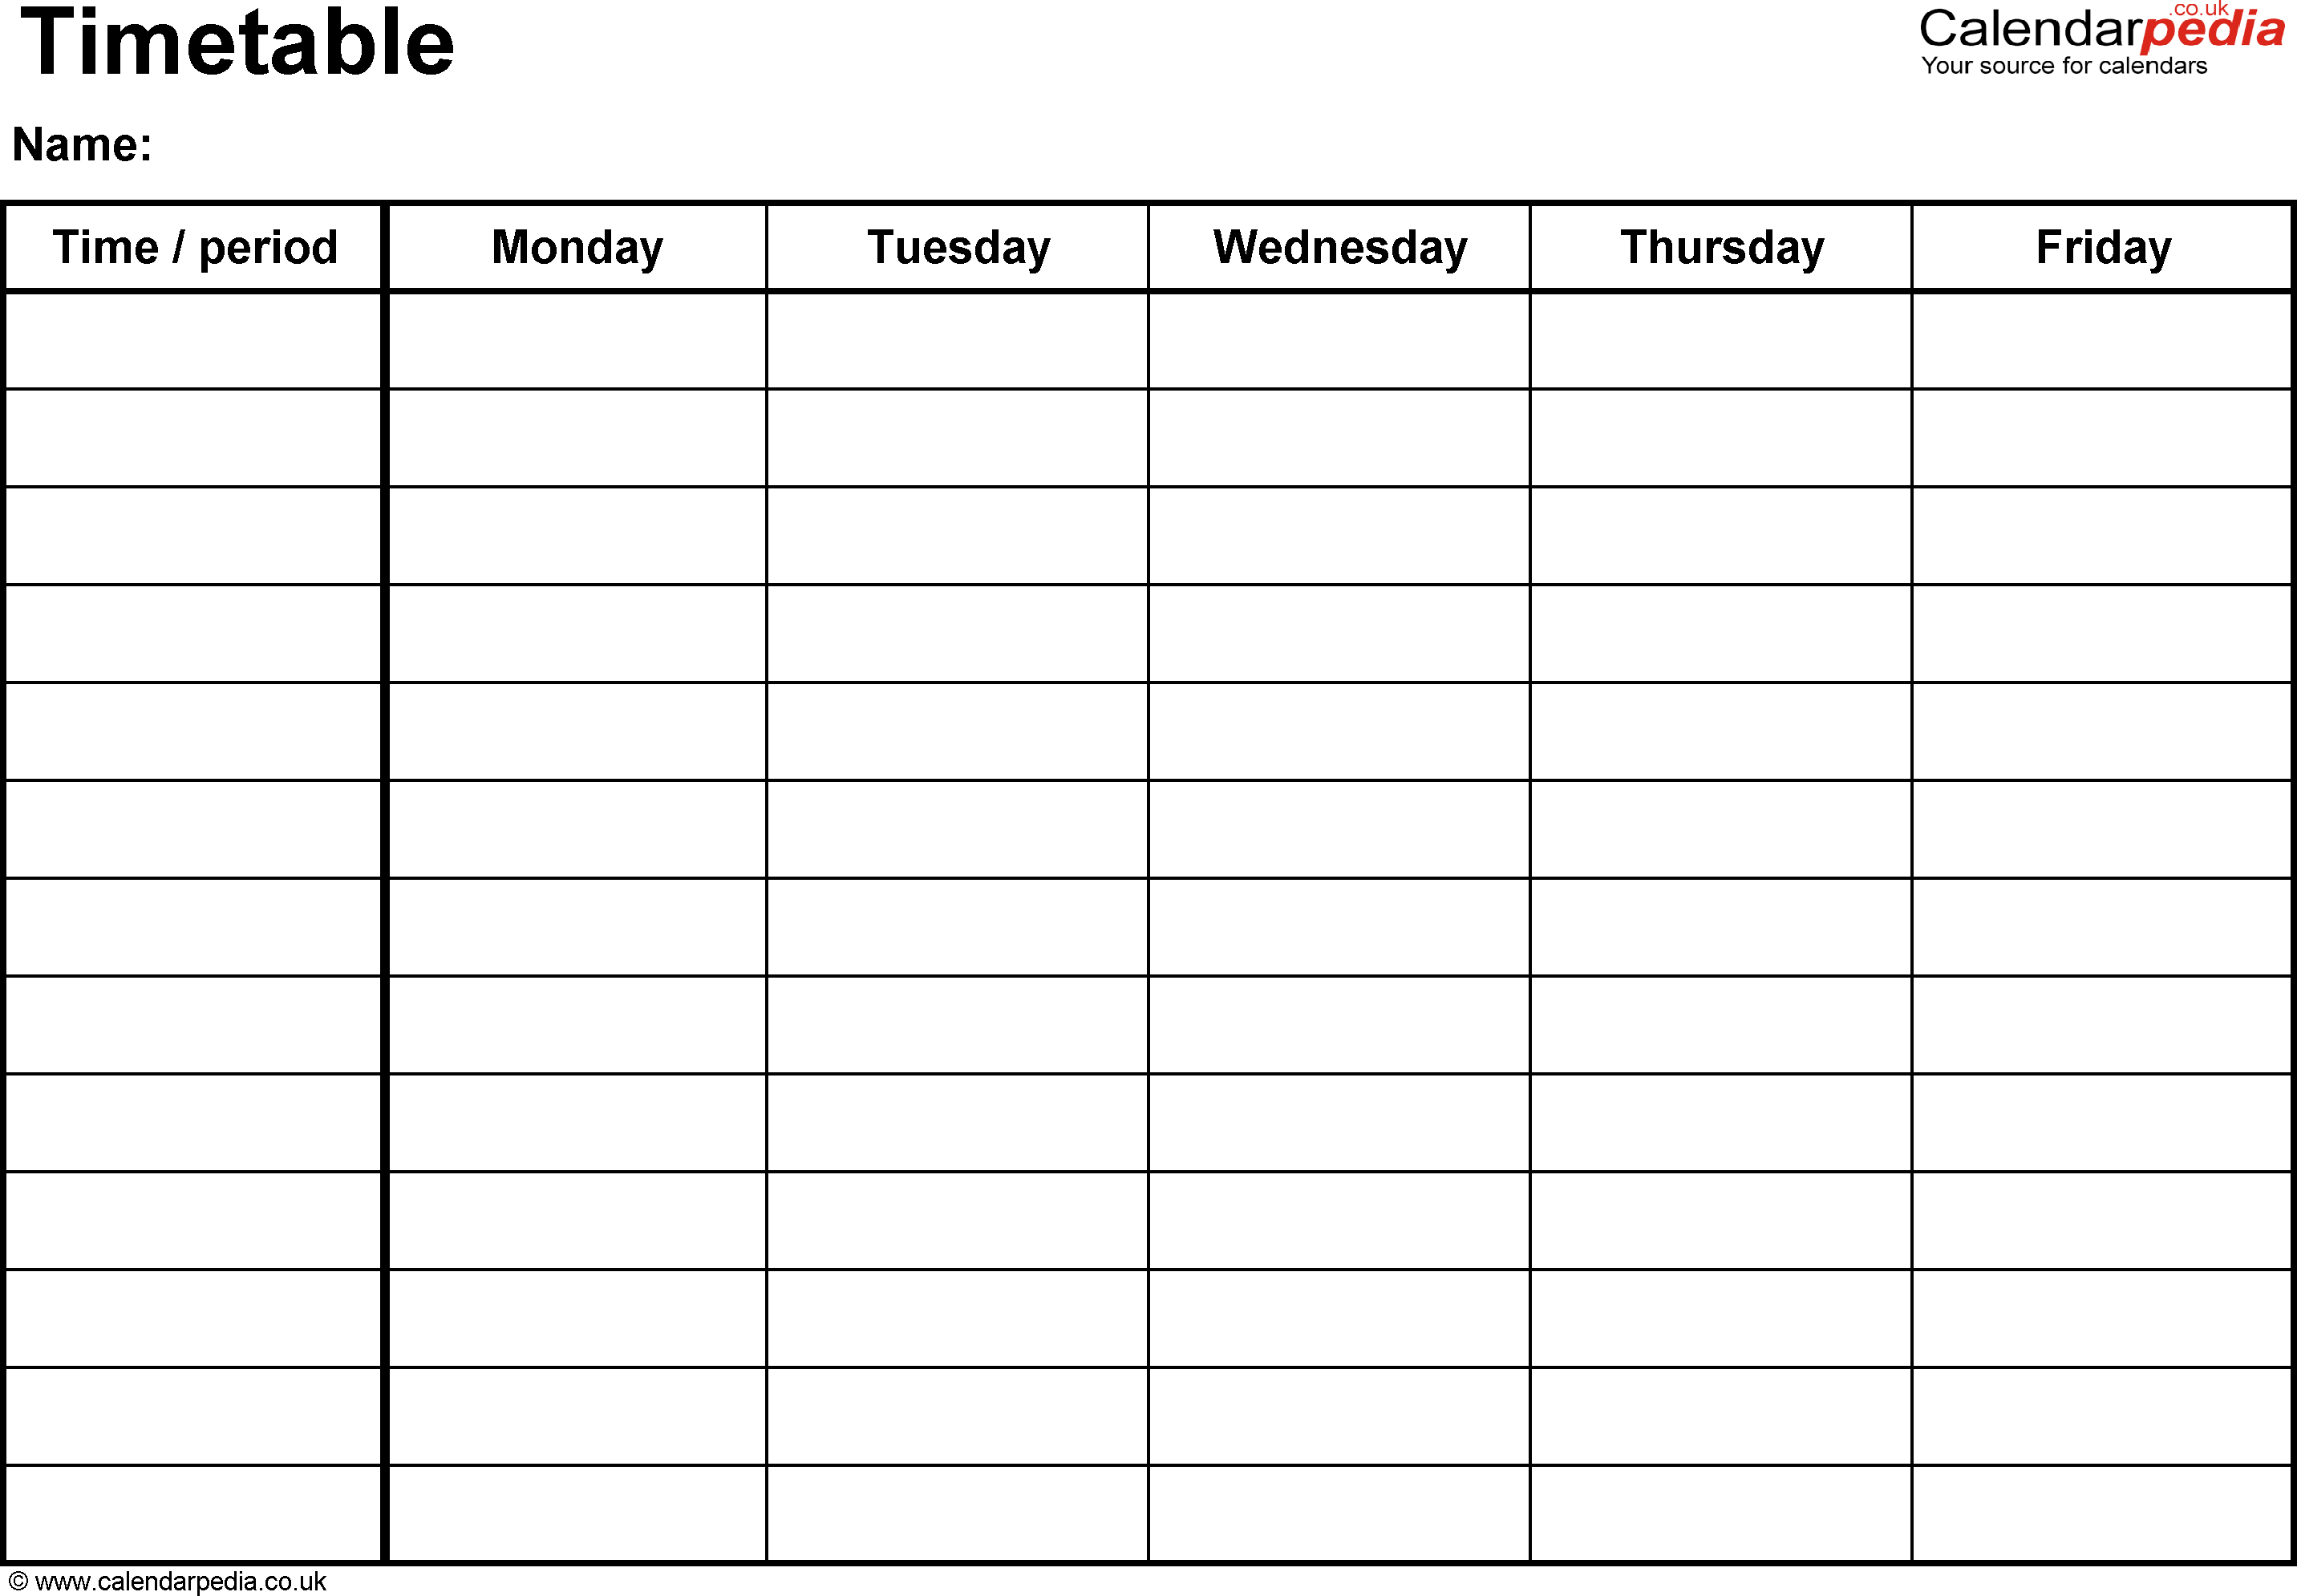 Timetable Templates For Microsoft Excel - Free And Printable